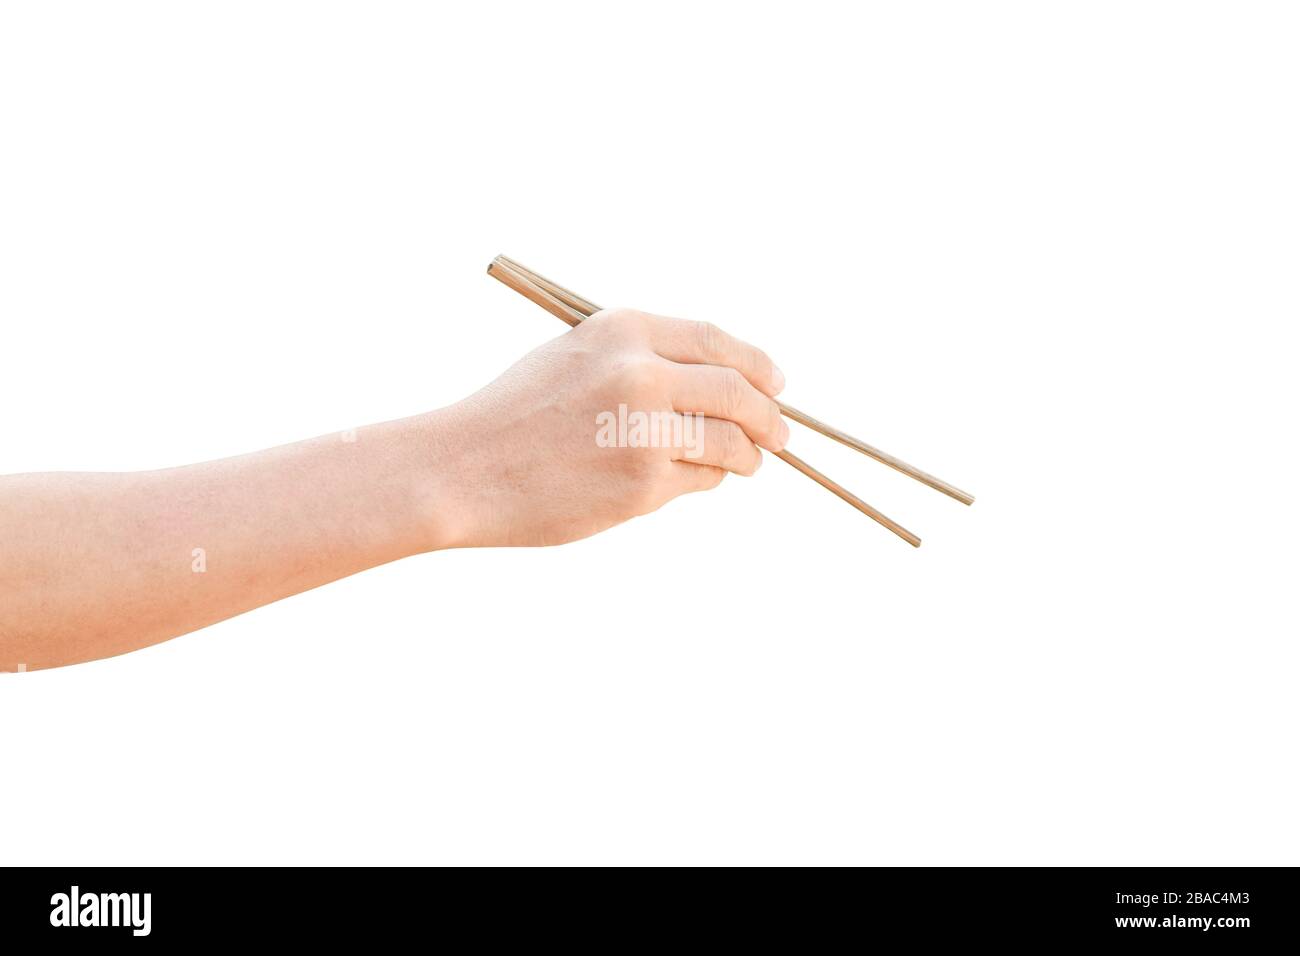 hand holding wooden chopsticks isolated on white background with clipping path. Stock Photo